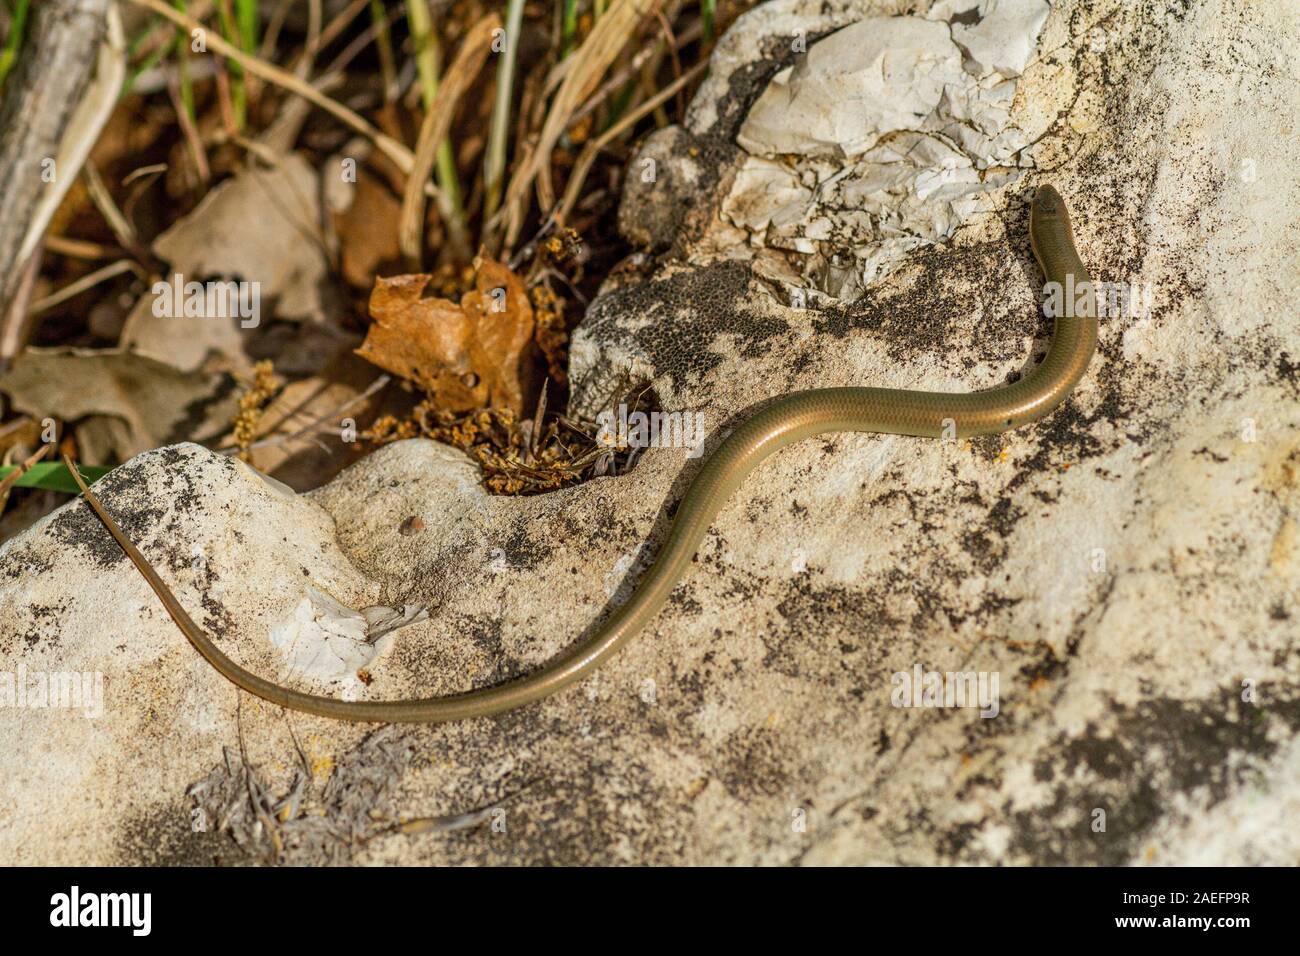 Chalcides guentheri, or Gunther's Cylindrical Skink, is a species of skink found in Israel, Lebanon, and parts of western Jordan and Syria. It is usua Stock Photo